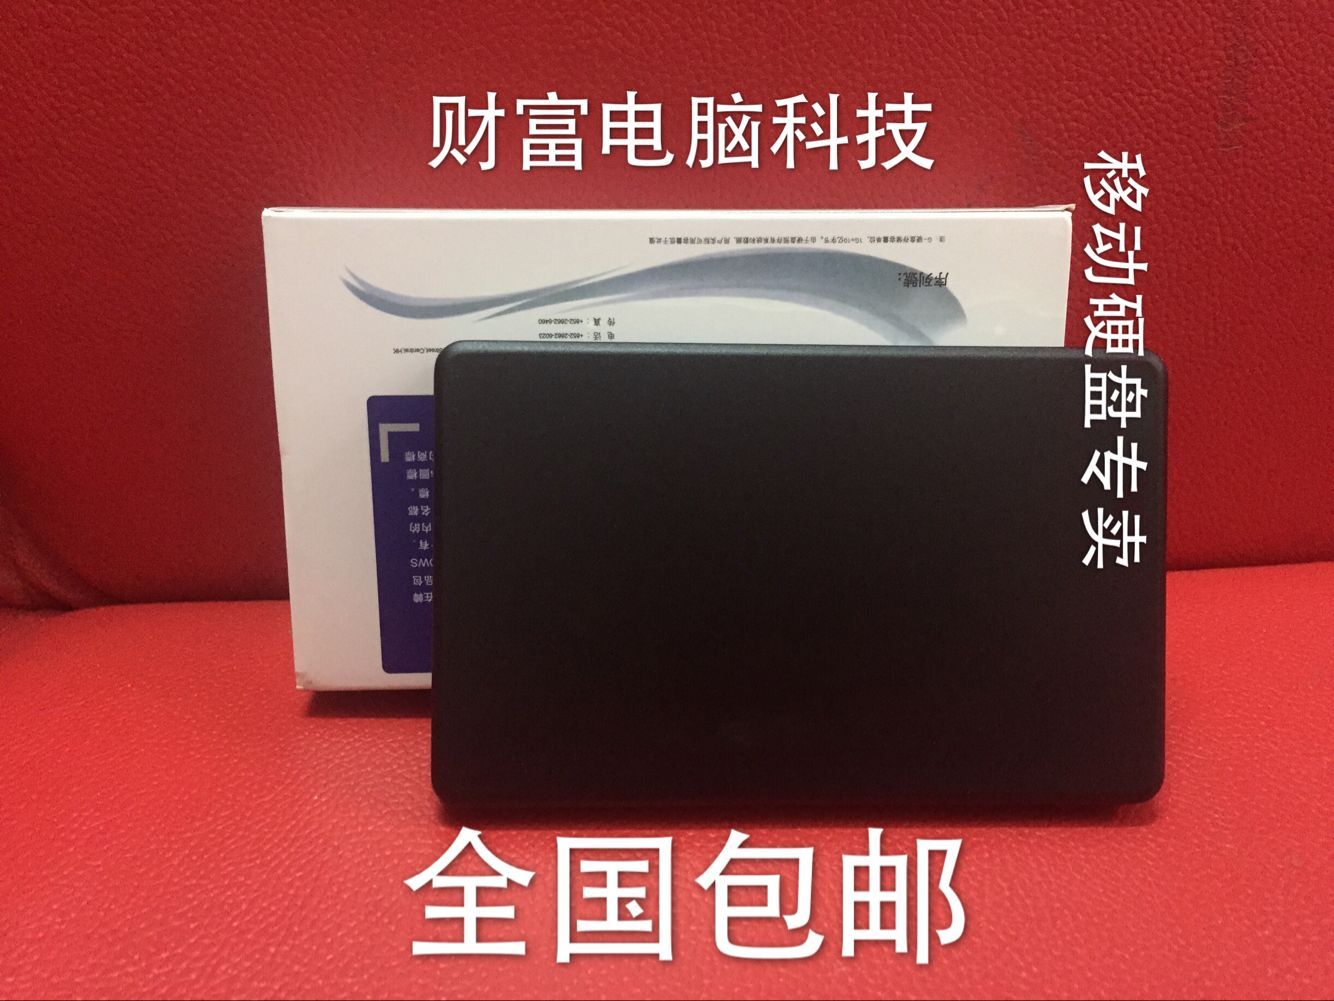 Mobile hard disk 320G high-speed ultra-thin mobile hard disk promotional period nationwide package volume high price